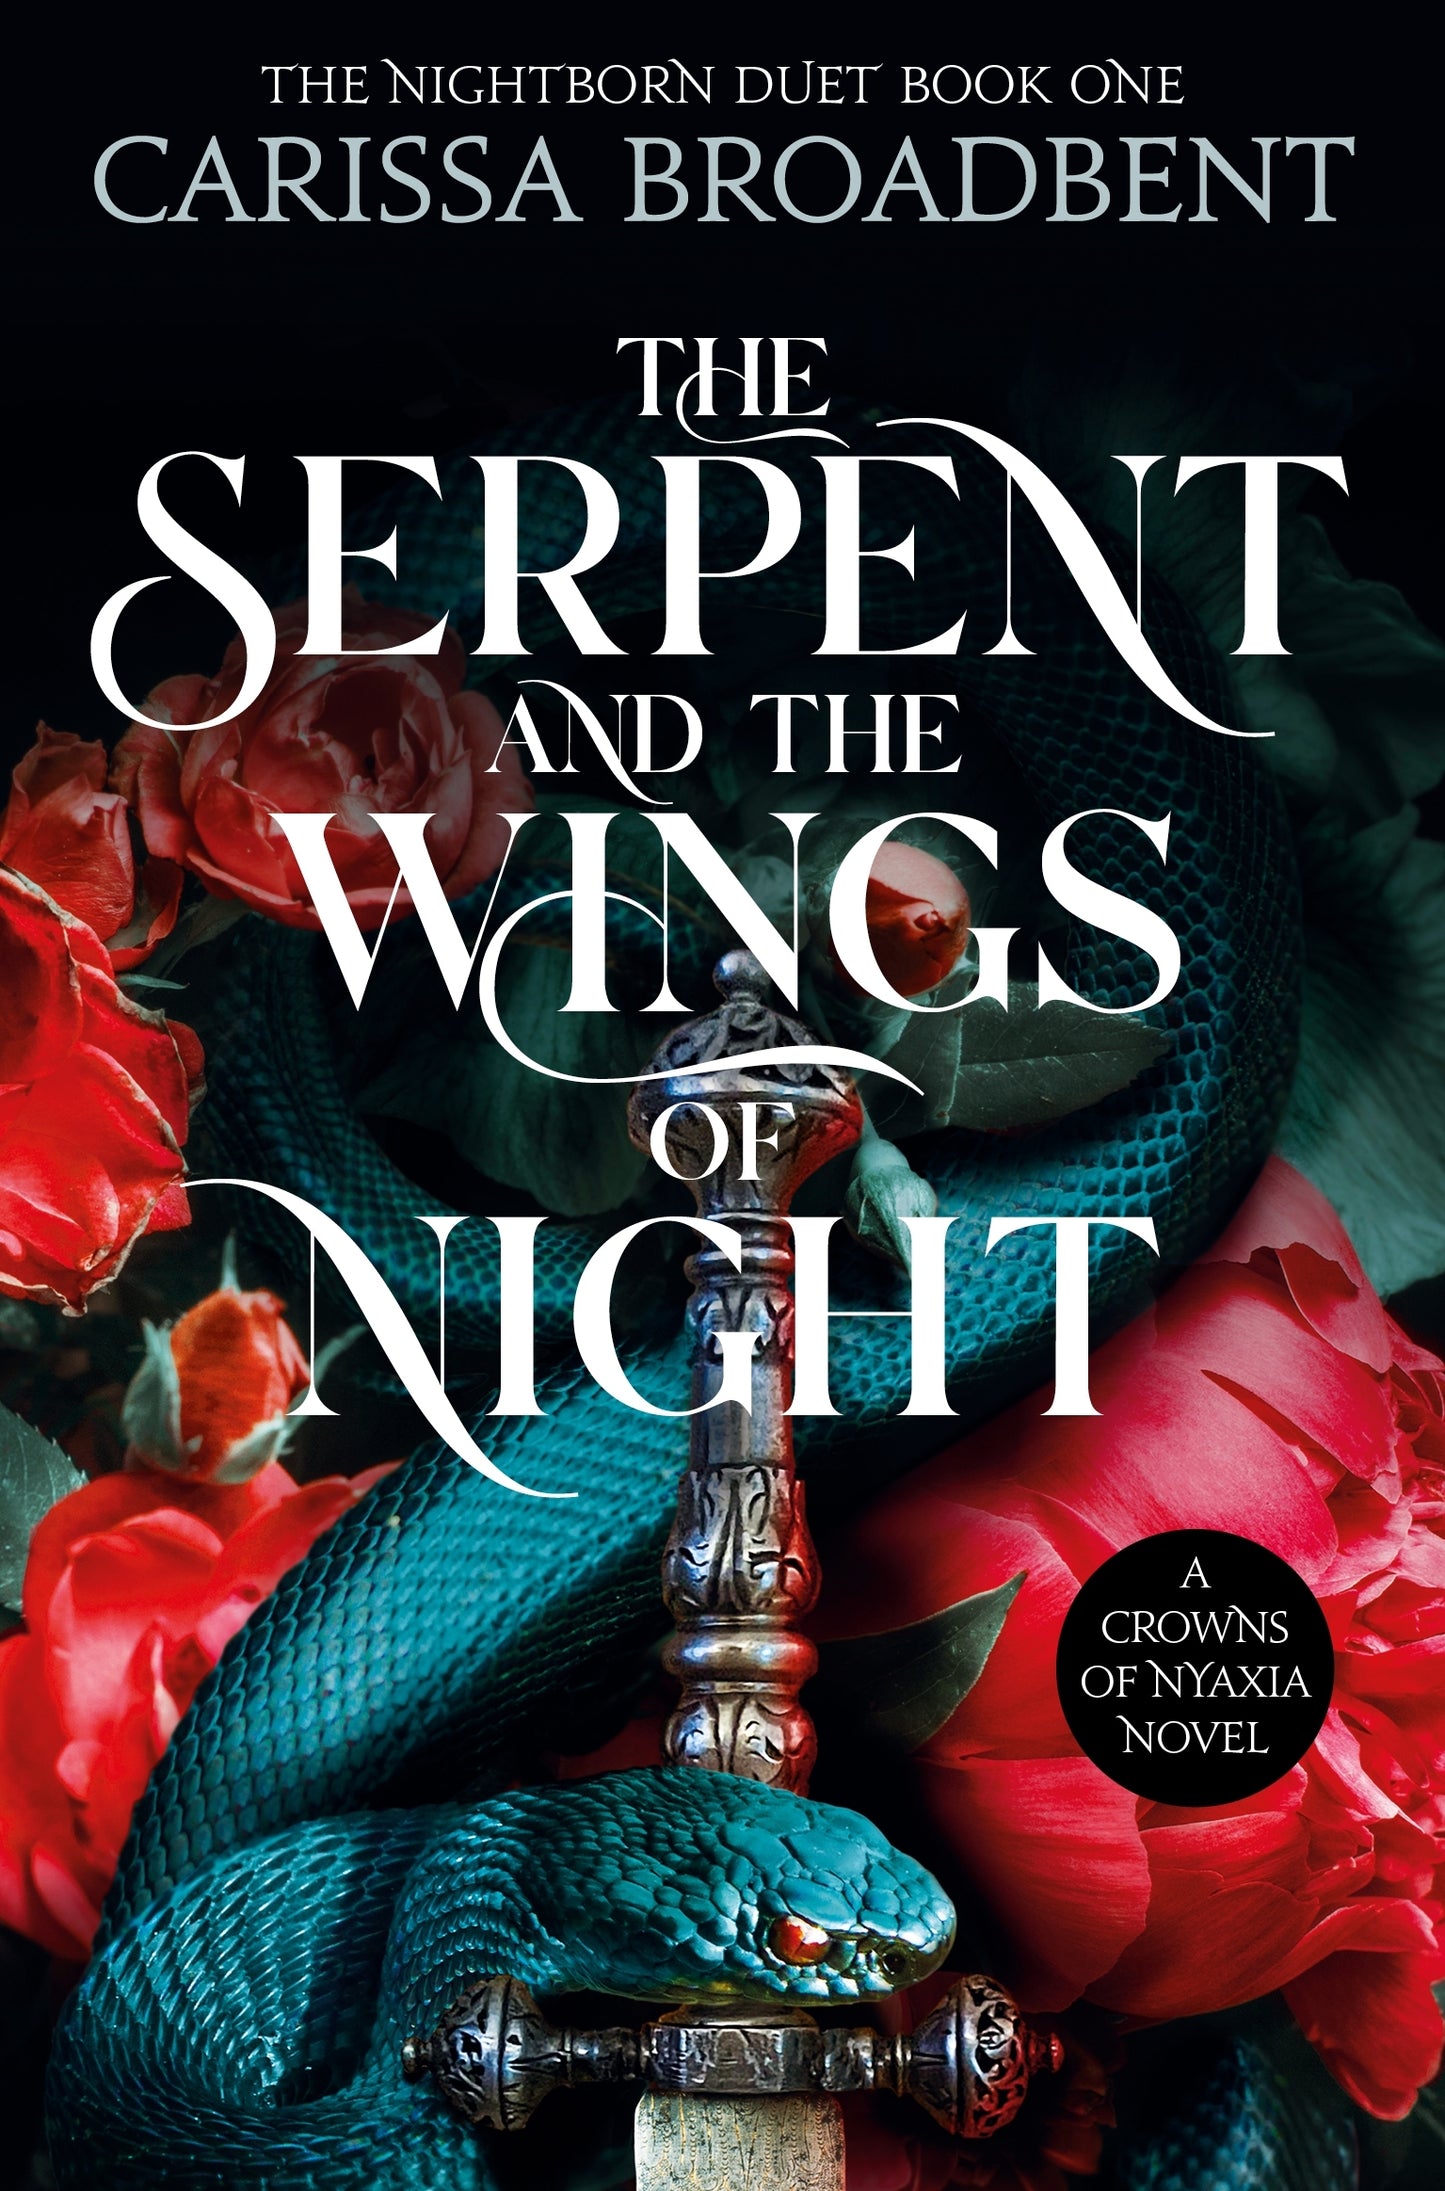 The Serpent and the Wings of Night: The Nightborn Duet, Book 1 (Crowns of Nyaxia #1)